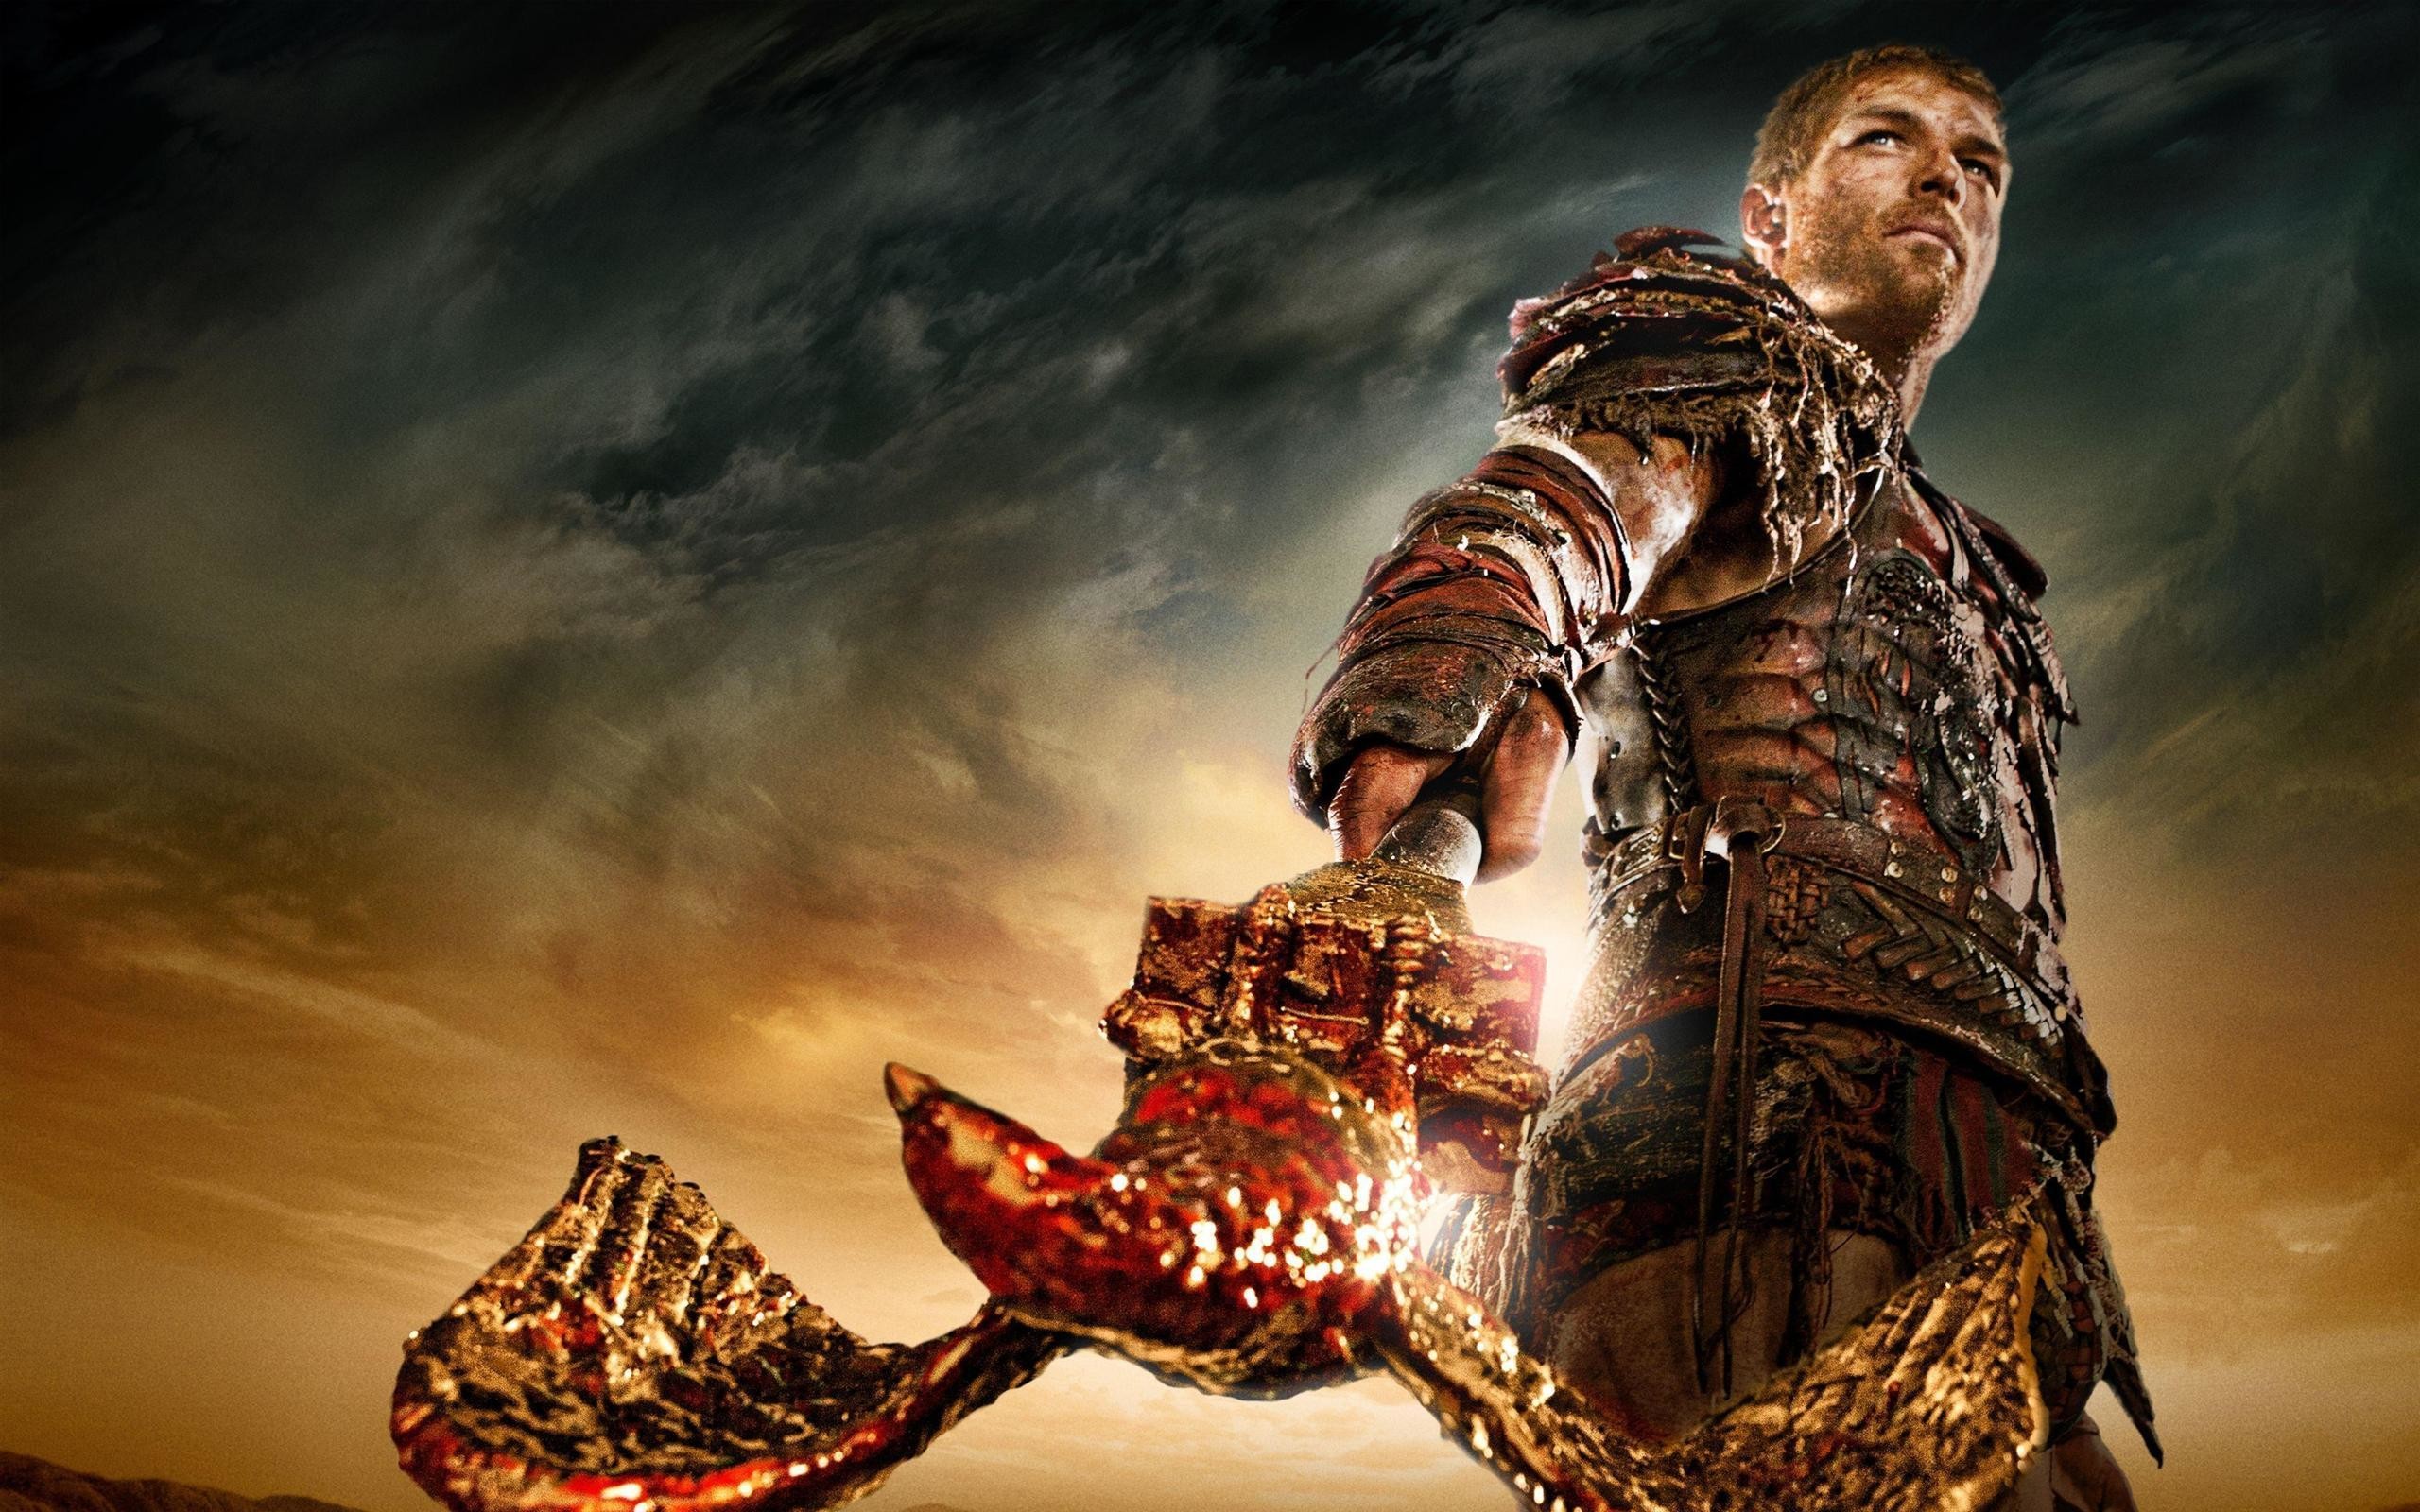 Res - 1920x1080, - Spartacus Blood And Sand , HD Wallpaper & Backgrounds